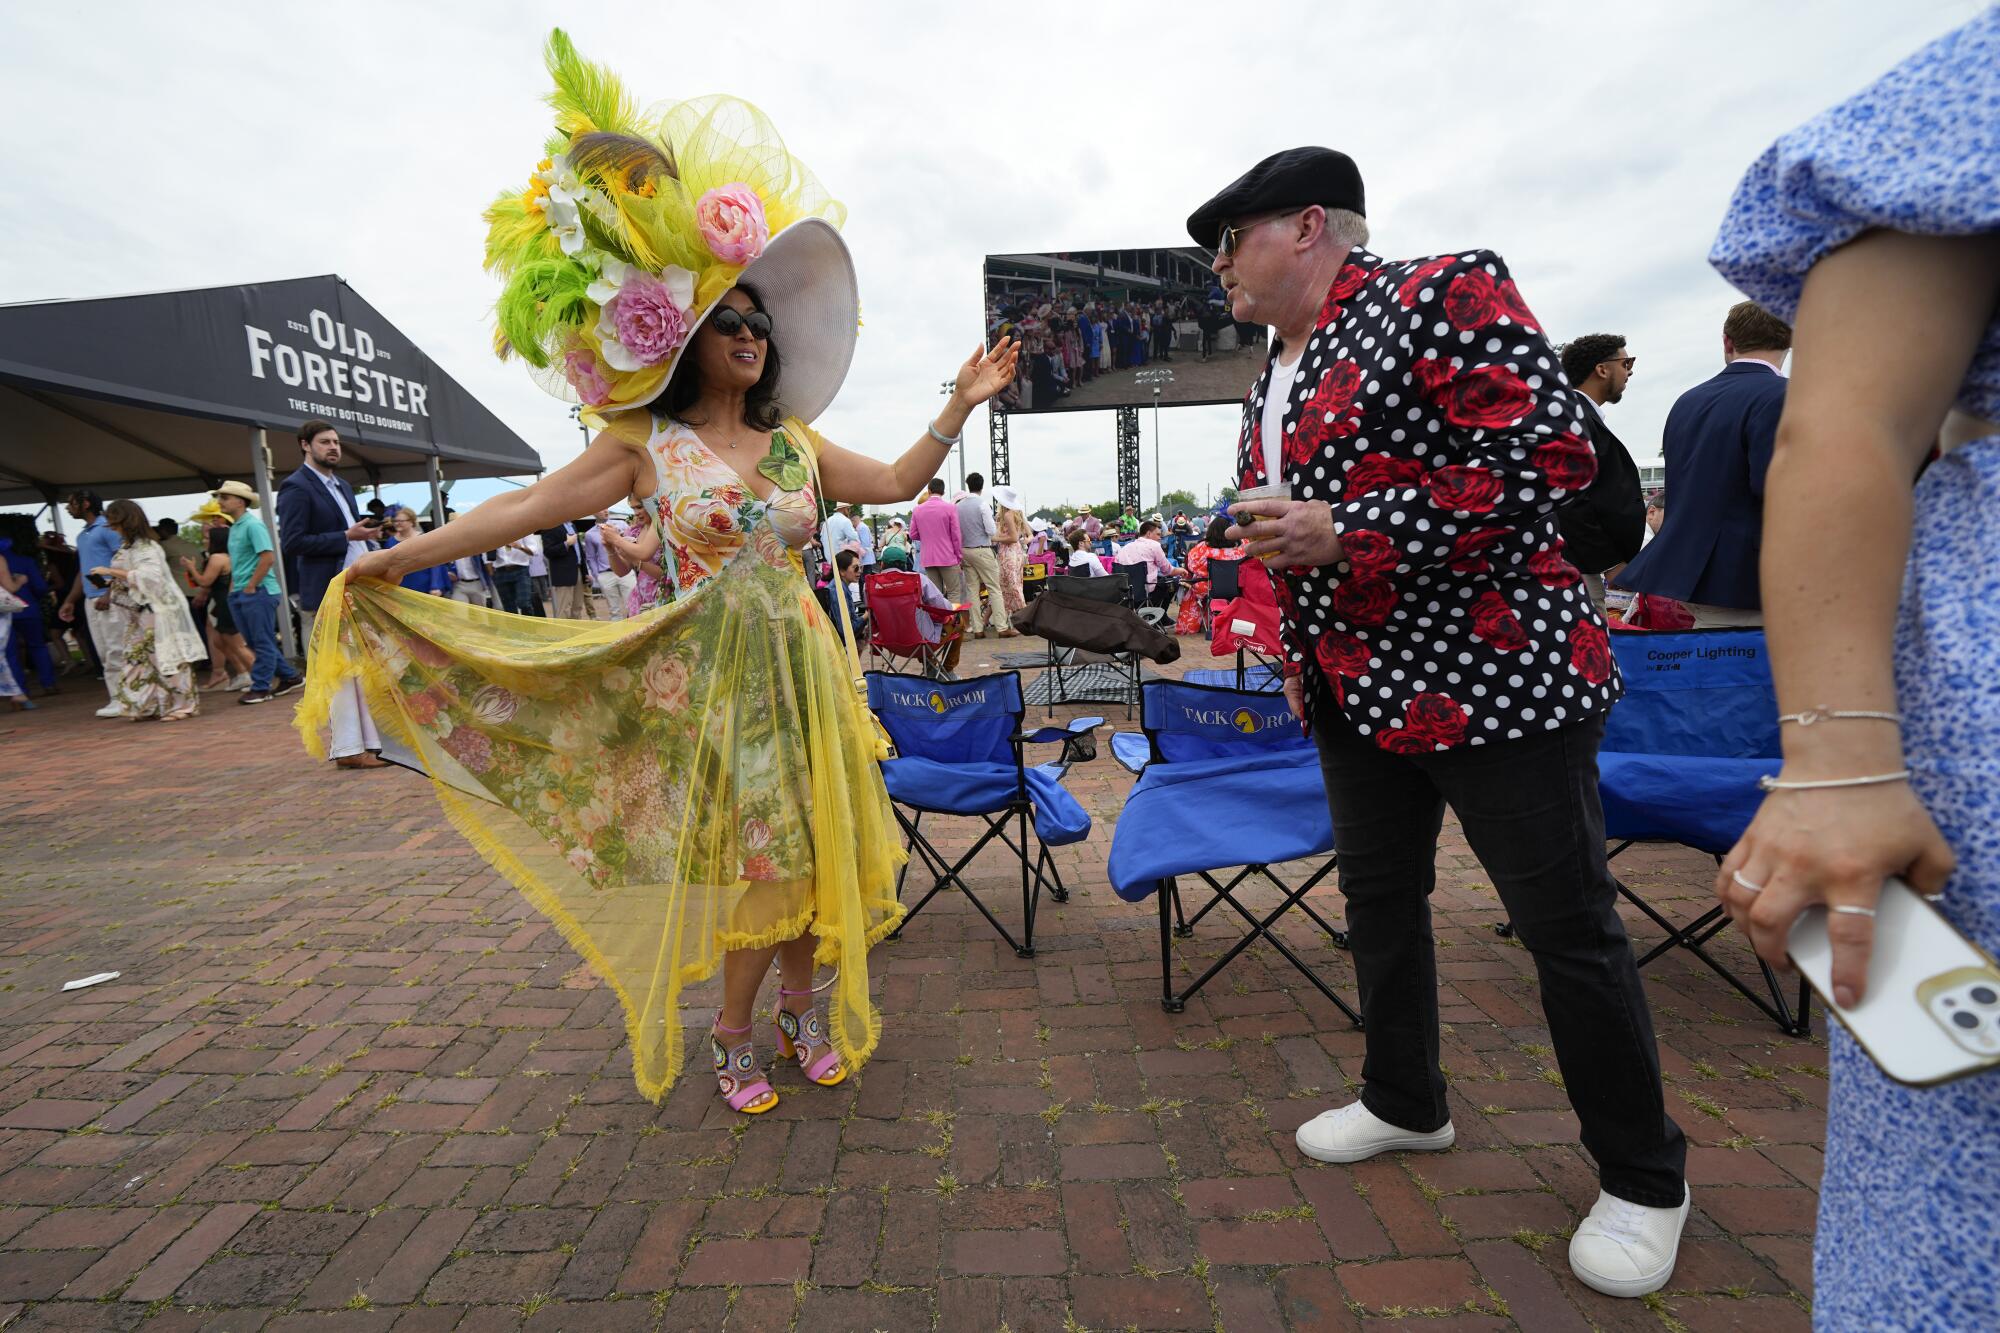 Hats of Kentucky Derby: All the headwear fashion at Churchill Downs